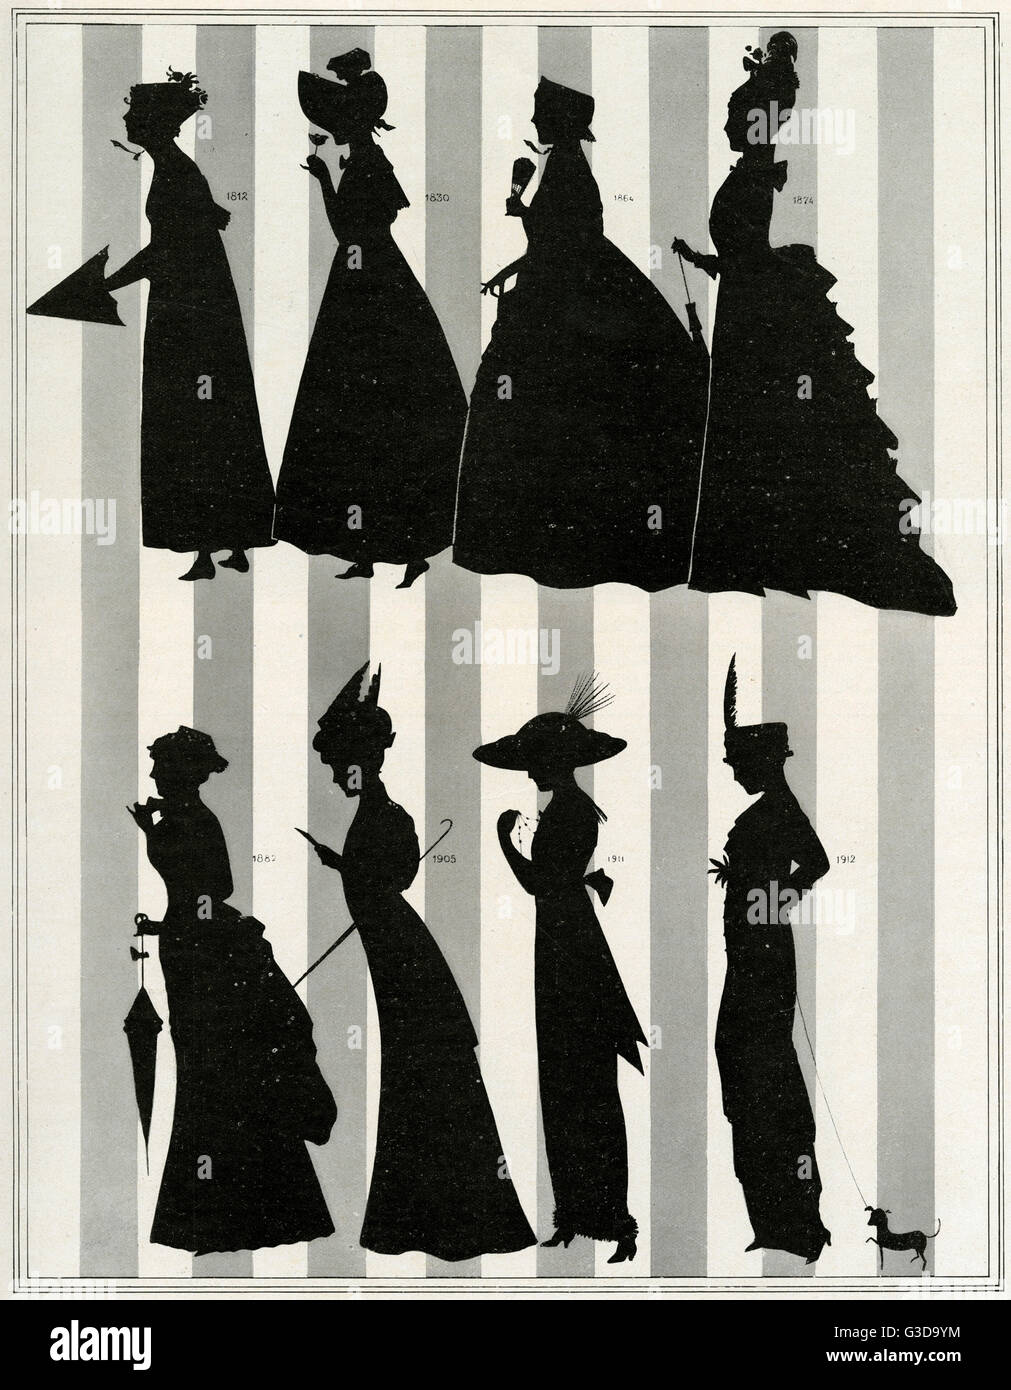 Hundred years of women's fashion, showing the silhouettes of change starting in 1812 Regency era with narrow gown, to Victorian era wider and wider bustle dresses and finally Edwardian era where the women's figure started to narrow again.     Date: 1812 t Stock Photo